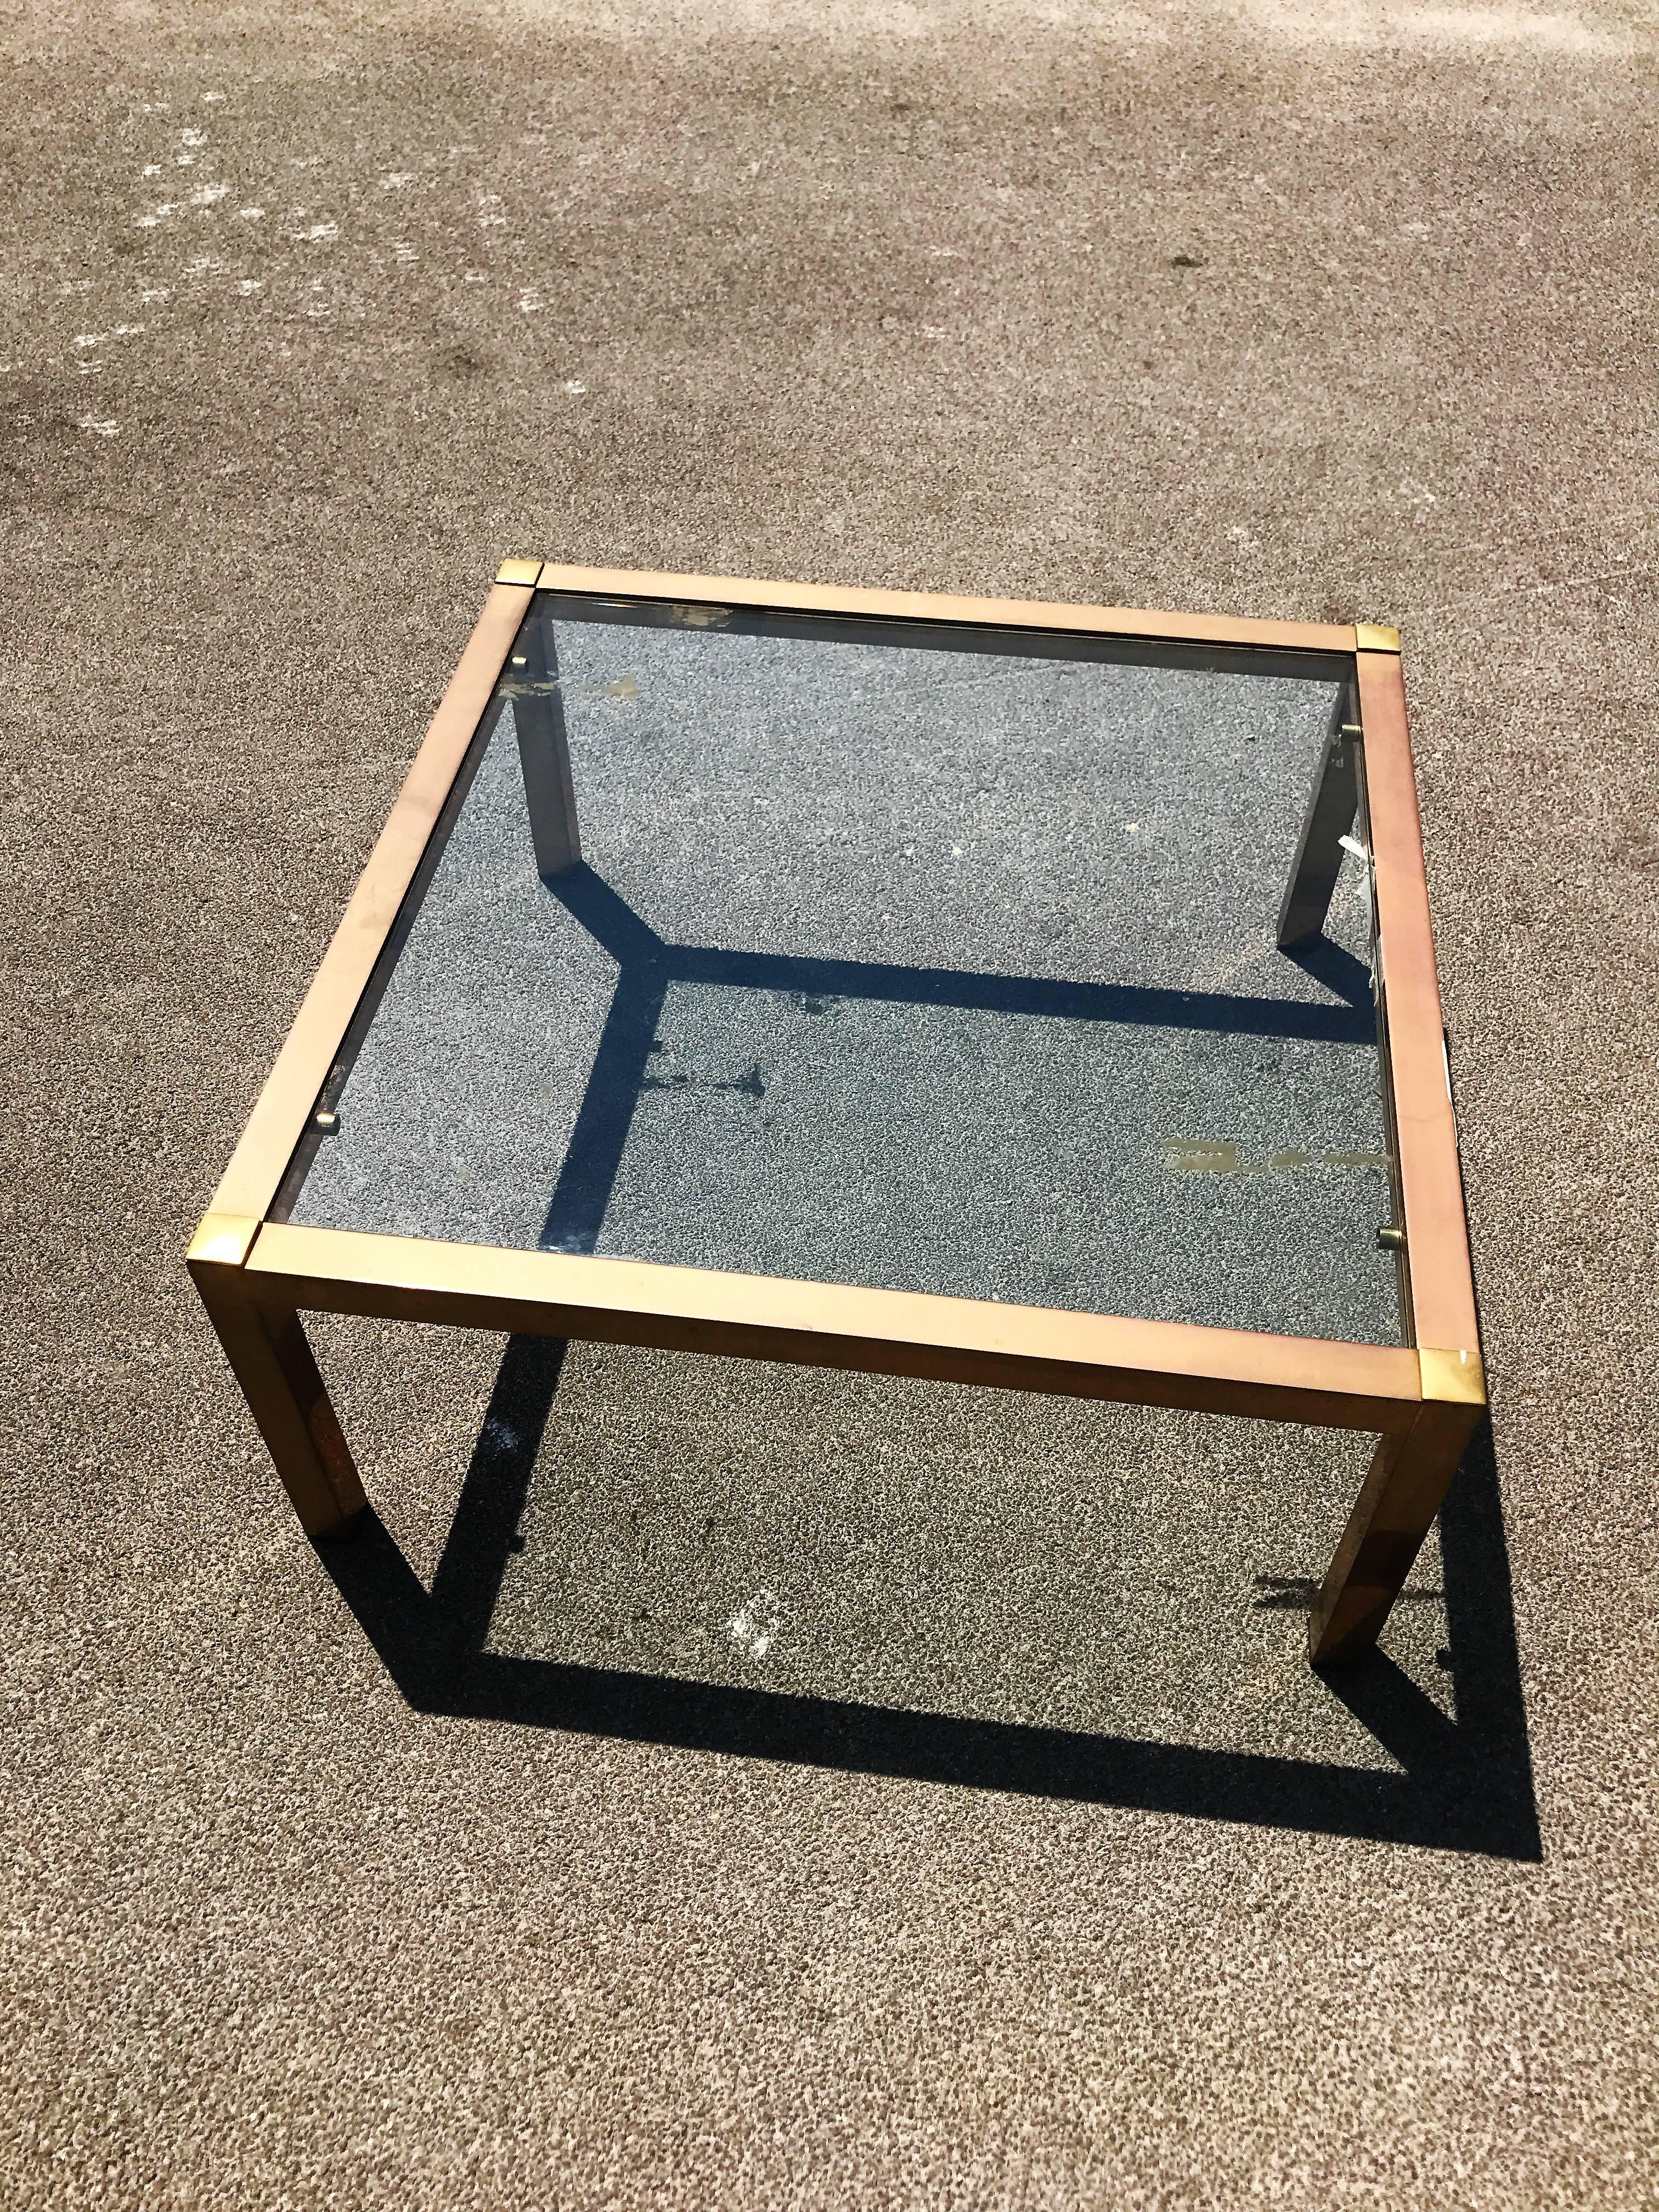 Coffee table with brass base and glass top.
Ideal for all types of environments.